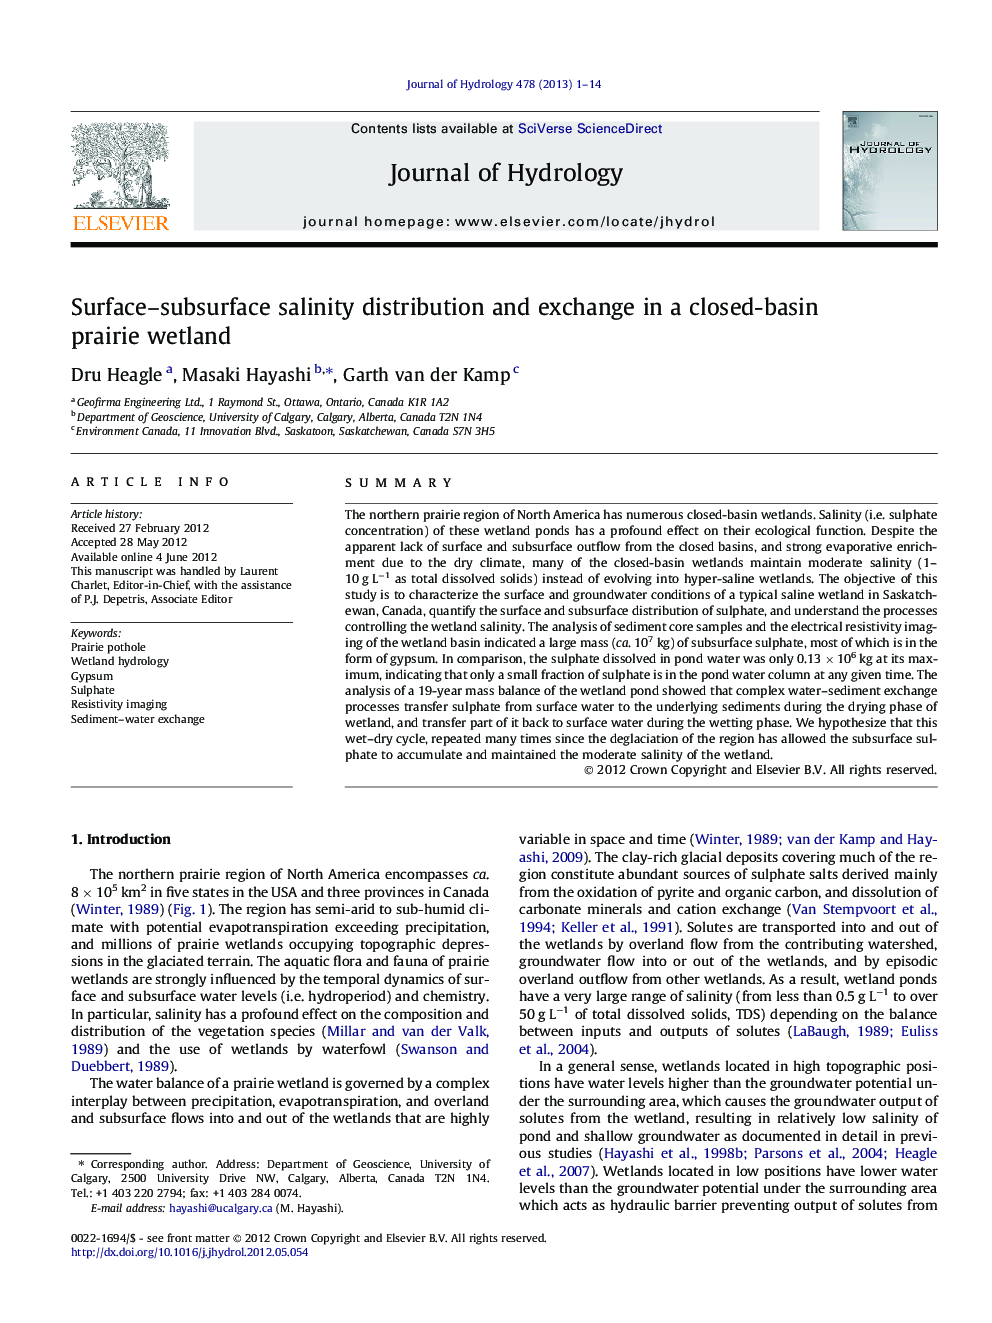 Surface–subsurface salinity distribution and exchange in a closed-basin prairie wetland